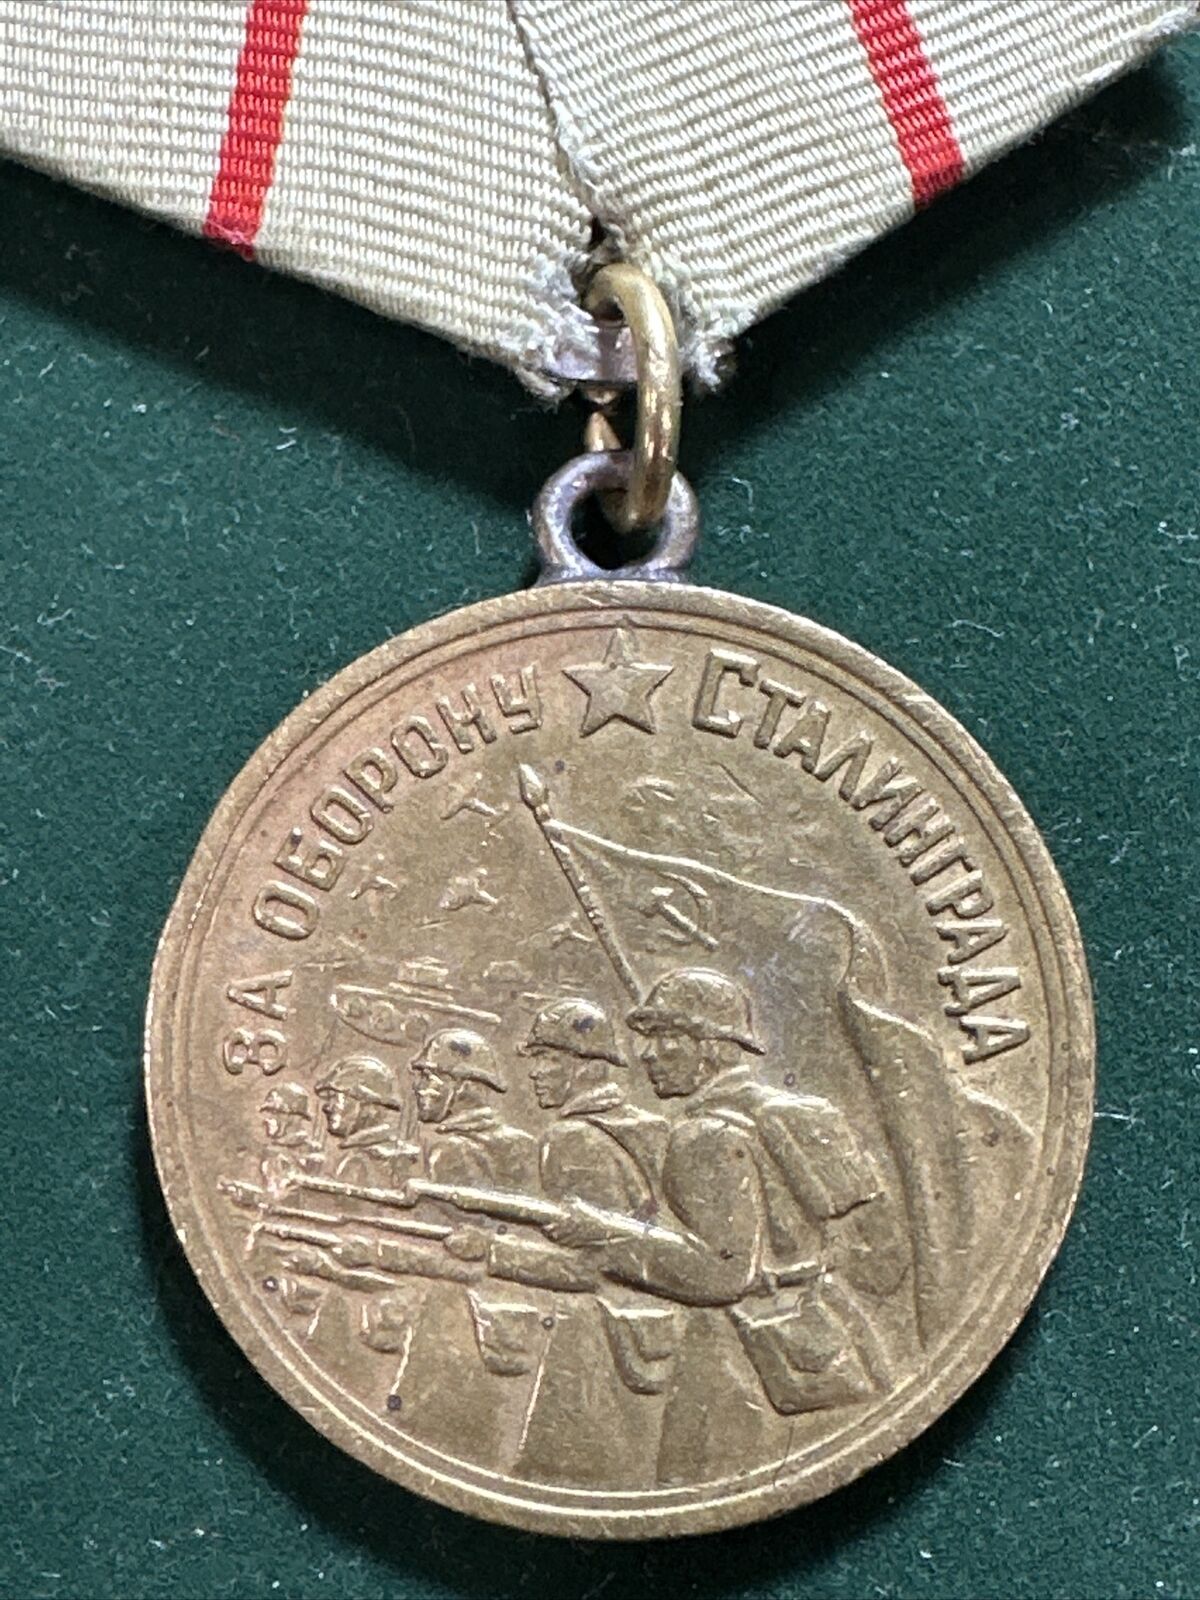 USSR WWII Medal for “ Defense of STALINGRAD “ Authentic 1942